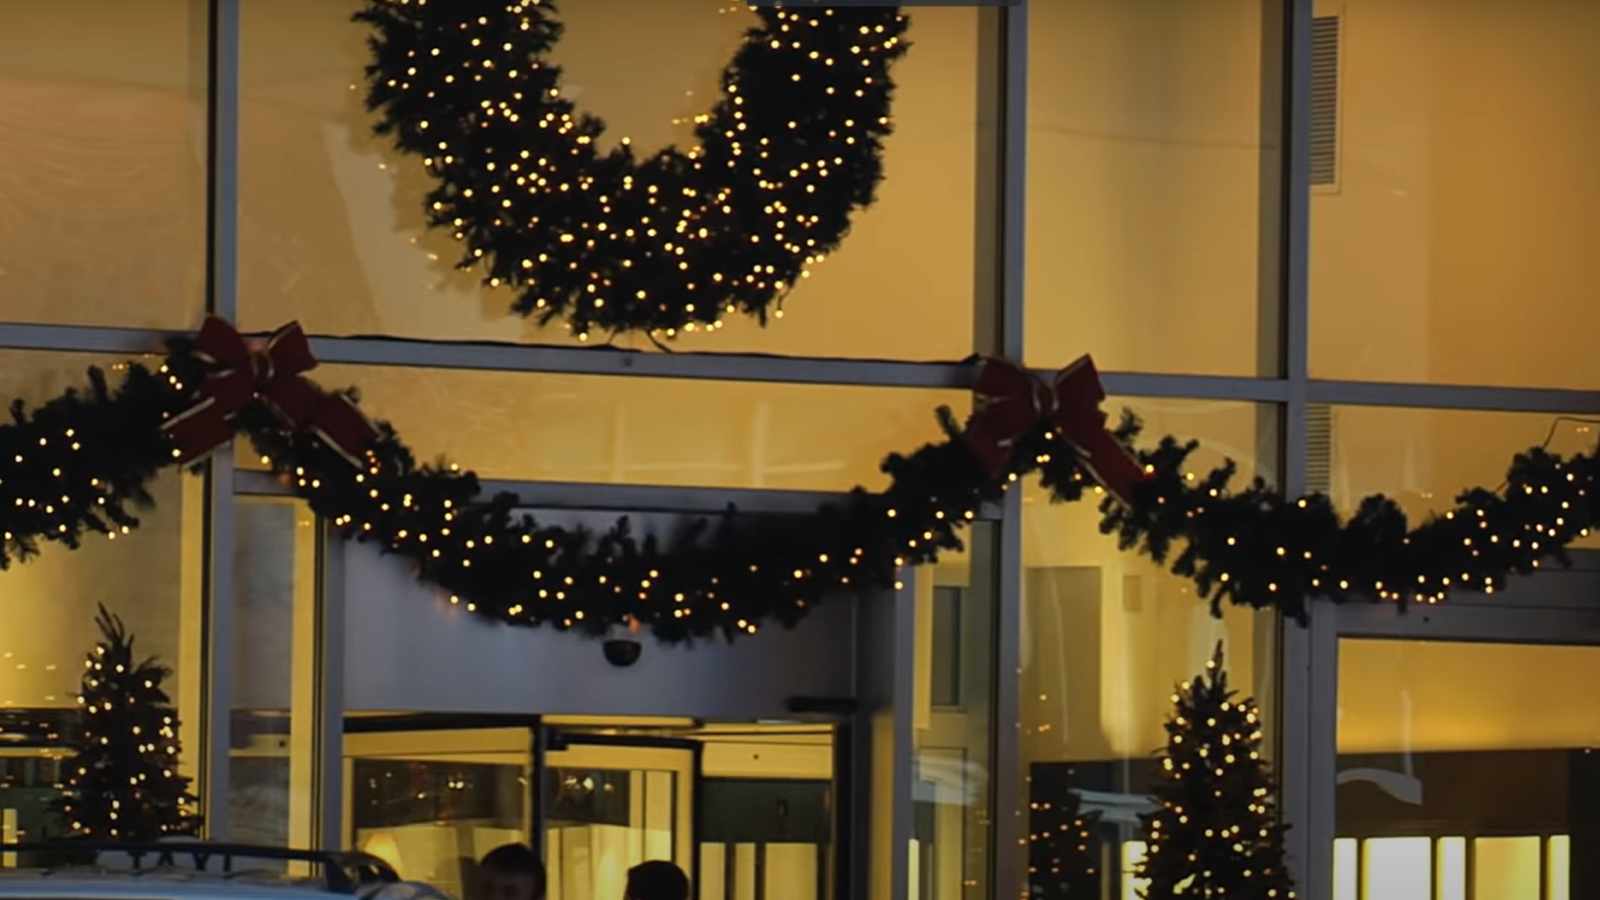 The Perfect Gift - Christmas wreaths and lights